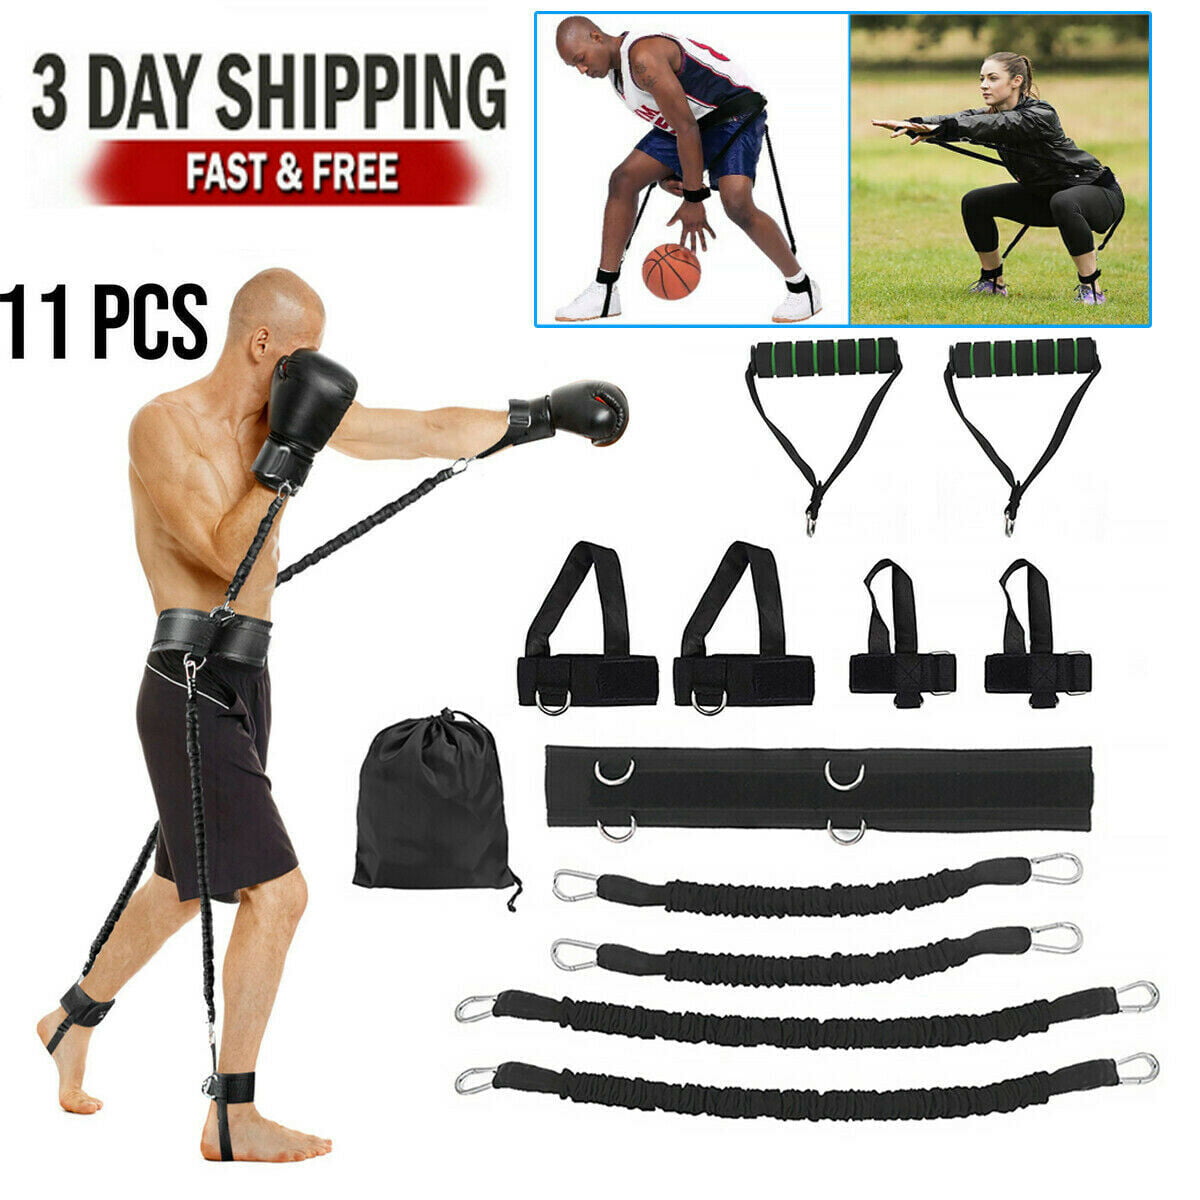 Boxing Thai Gym Strength Training Equipment Sports Fitness Resistance Bands Set